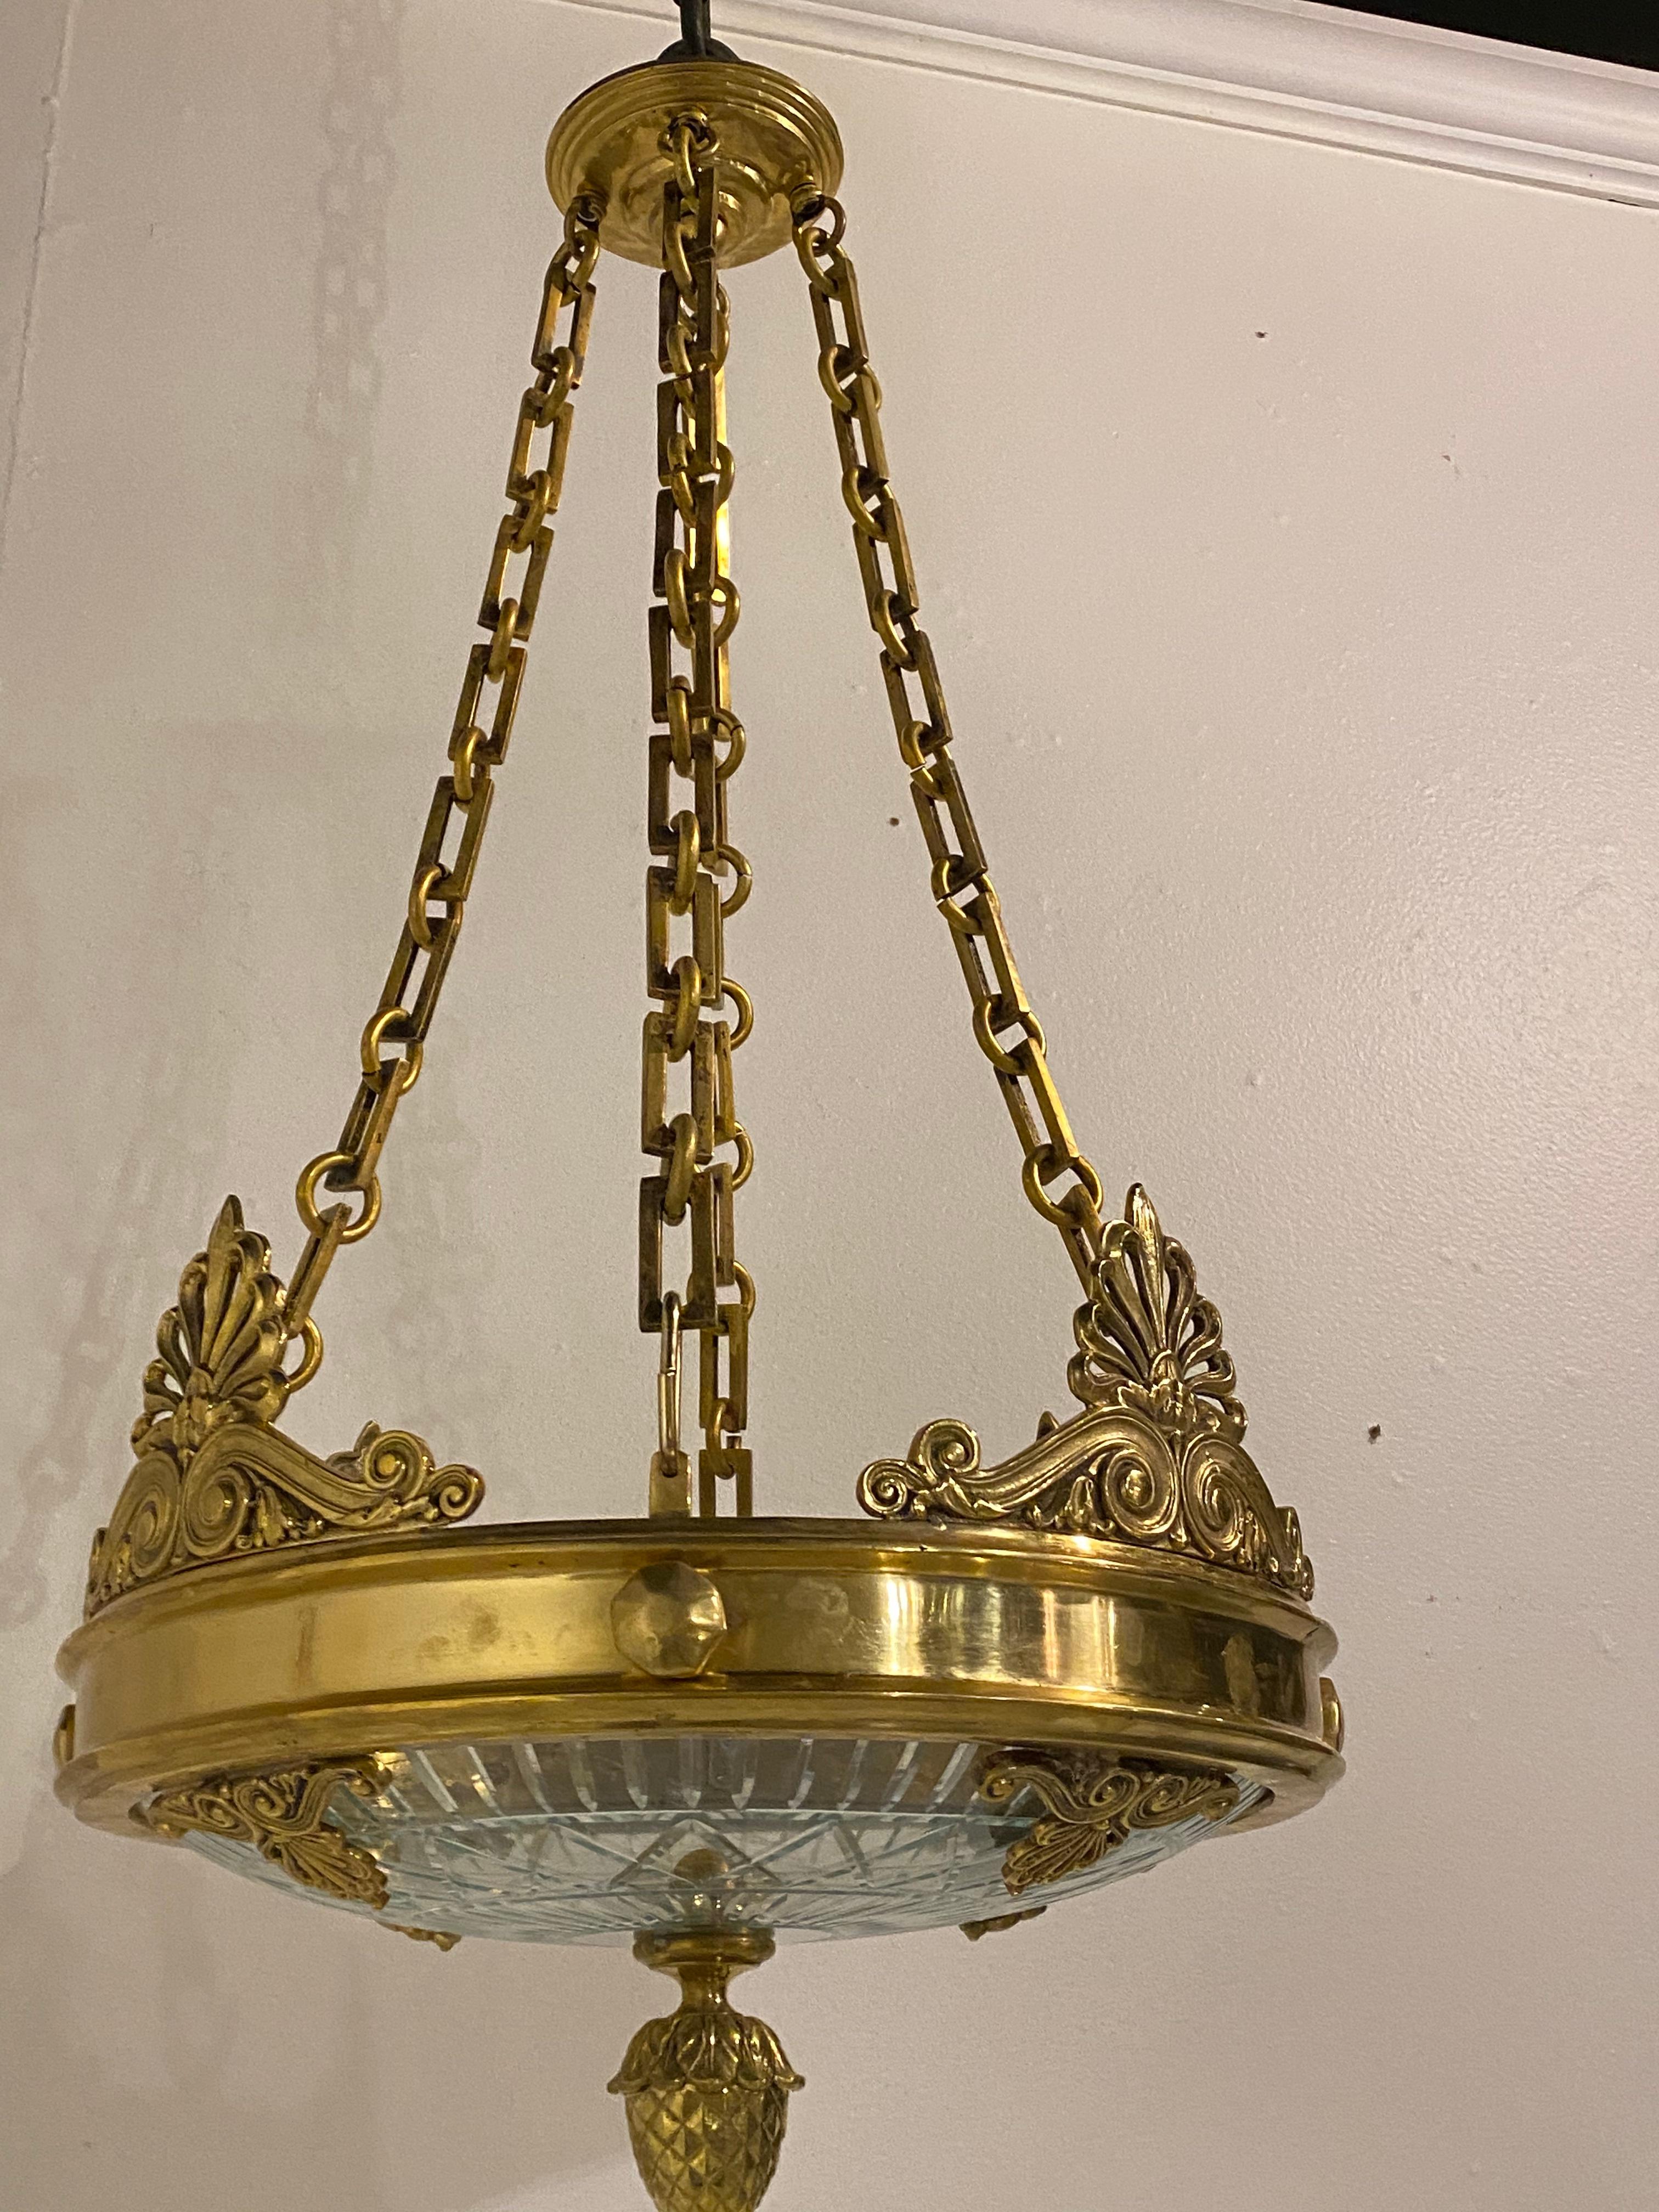 A circa 1900 gilt bronze chandelier with cut glass inset. In very good vintage condition. 

Dealer: G302YP 

